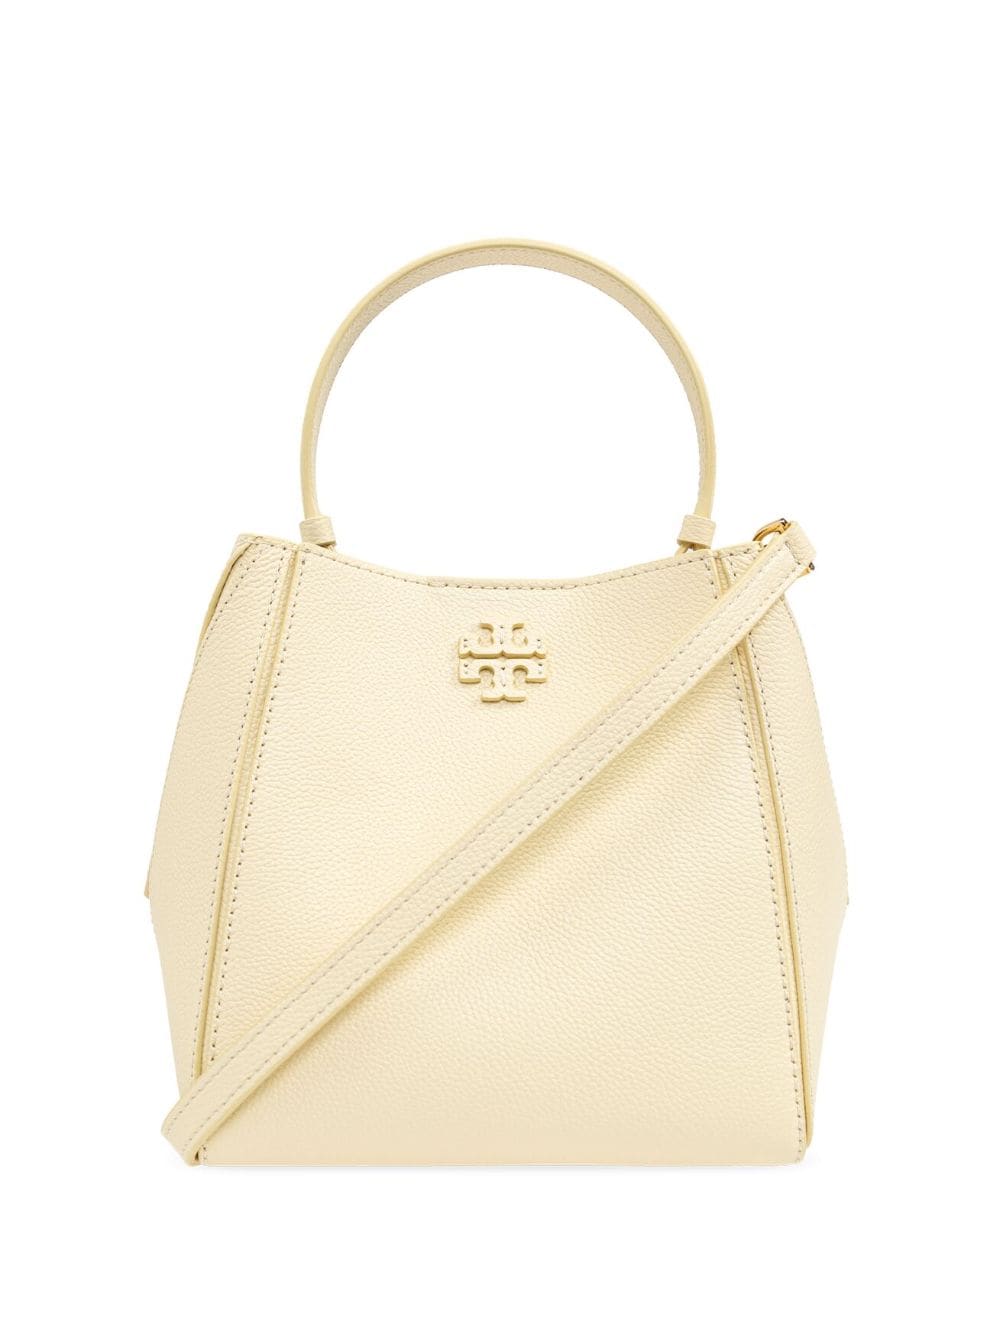 Tory Burch Mcgraw Leather Bucket Bag In Neutral